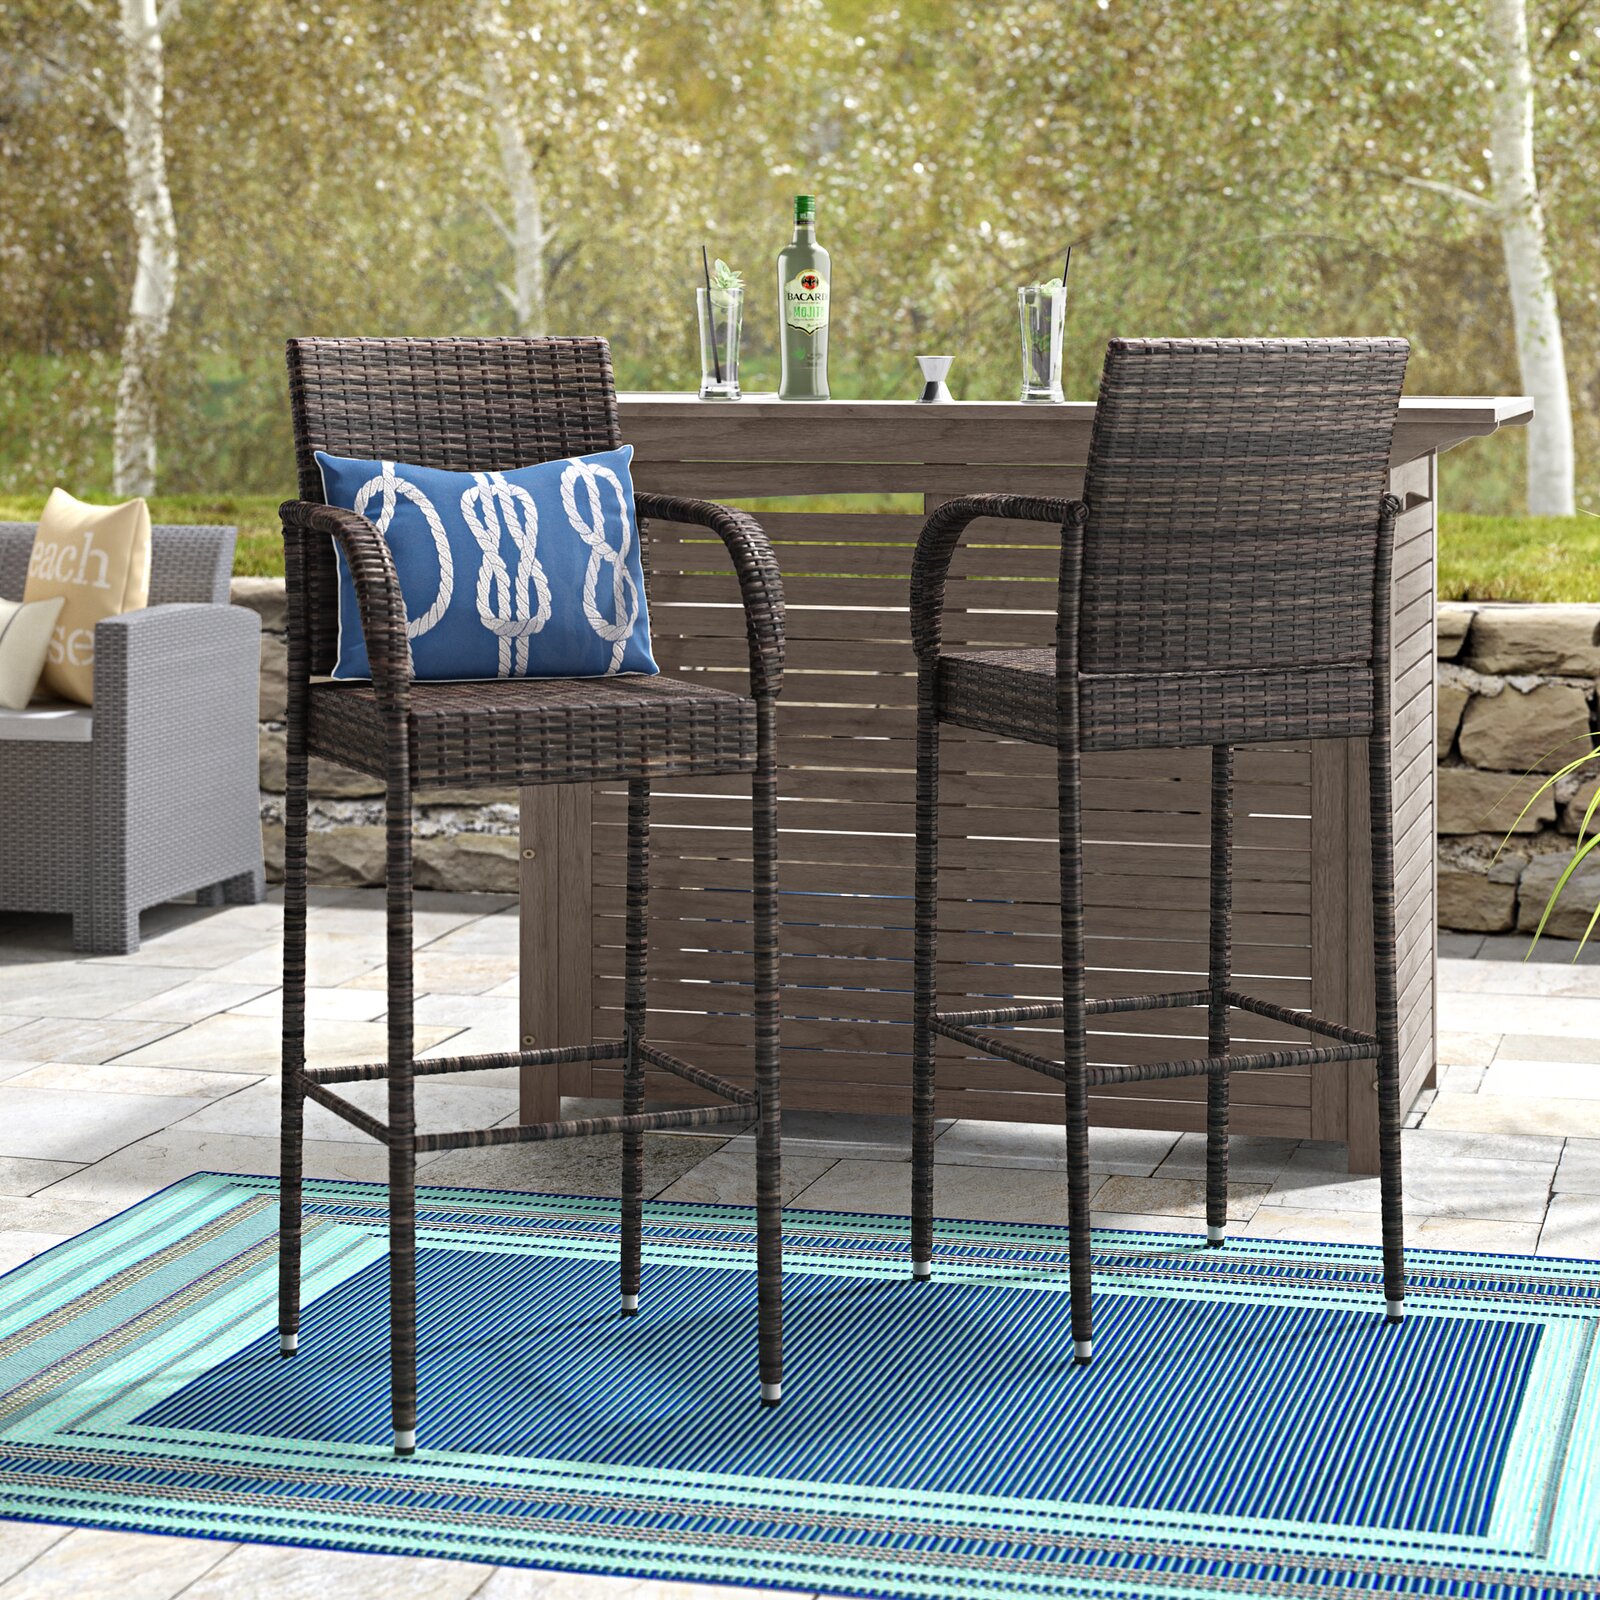 Wicker Bar Stools Set of 2, Upgraded Outdoor Patio Furniture Wicker Bar Stool Chairs, Bar Stool Rattan Chair with Iron Frame, Armrest, Footrest, Counter Chairs for Garden Pool Lawn Backyard, W2105 - image 1 of 11